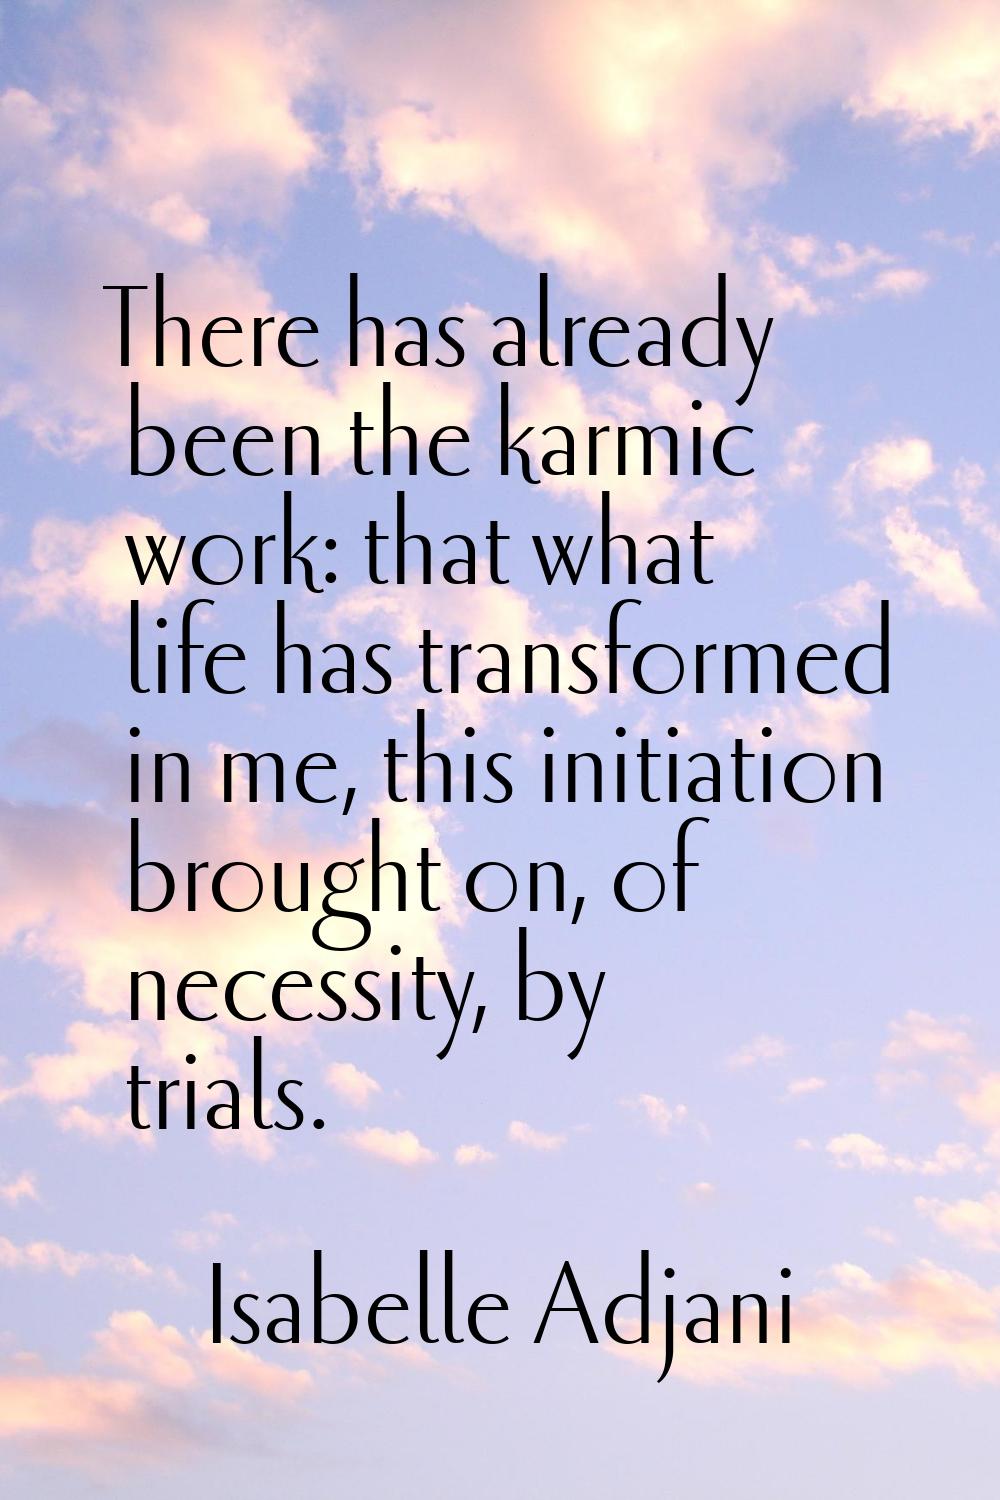 There has already been the karmic work: that what life has transformed in me, this initiation broug